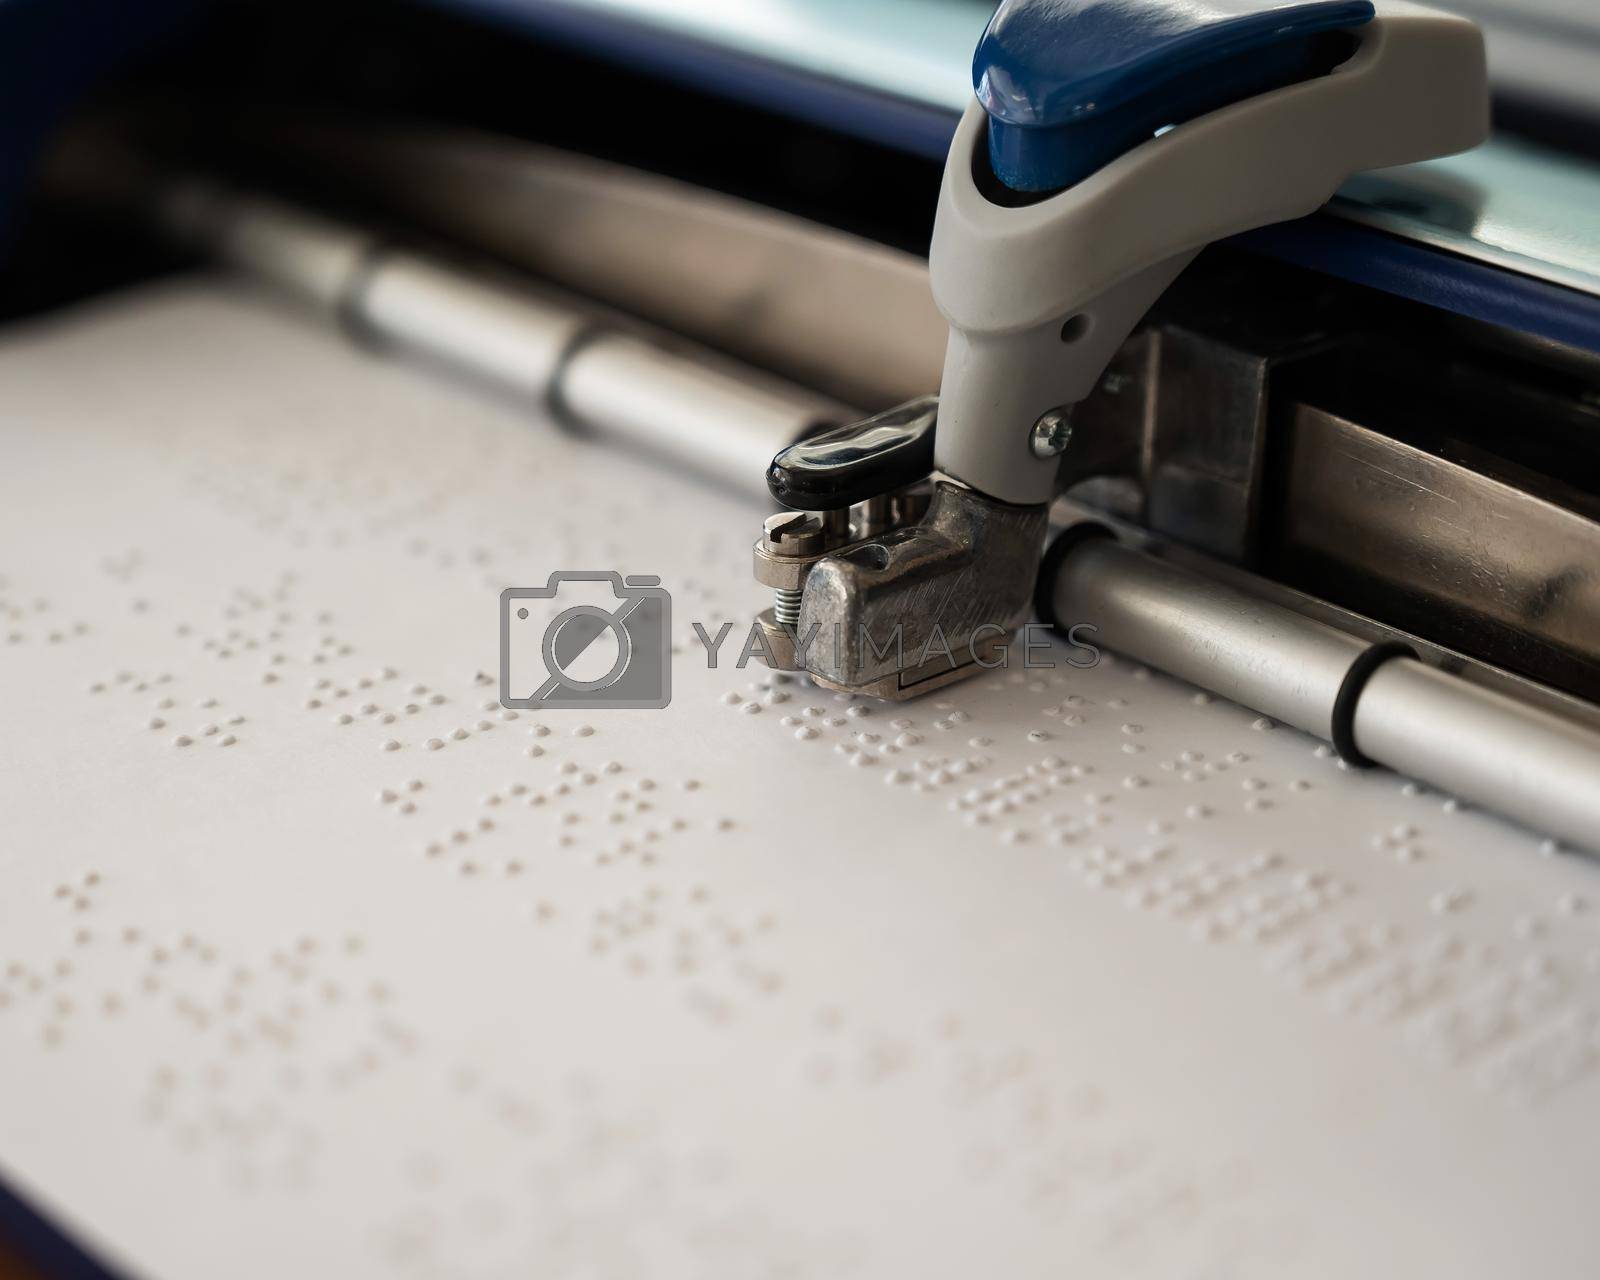 Royalty free image of Close-up of a braille code printing machine. by mrwed54